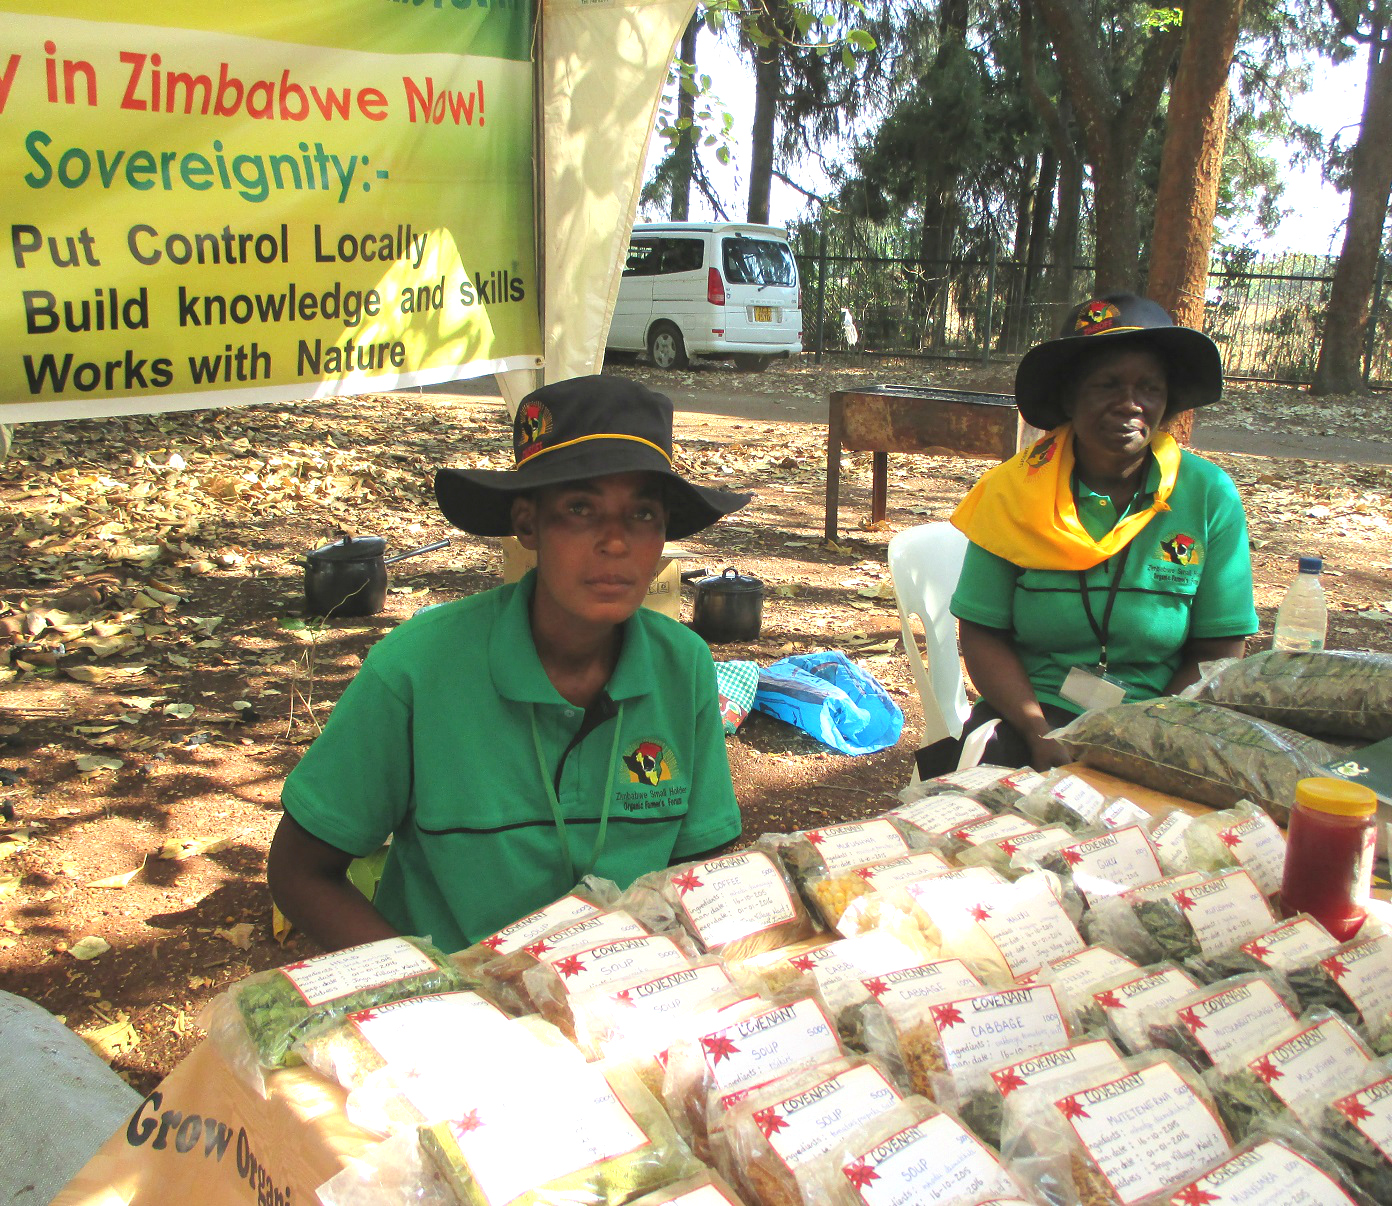 Members of the Zimbabwe Organic Smallholder Farmers Forum display their seeds at a seed fair. Seed fairs bring together a range of sellers from whom local farmers may purchase indigenous seeds rather than from vendors tied to corporate agriculture. Photo courtesy of Elizabeth Mpofu.